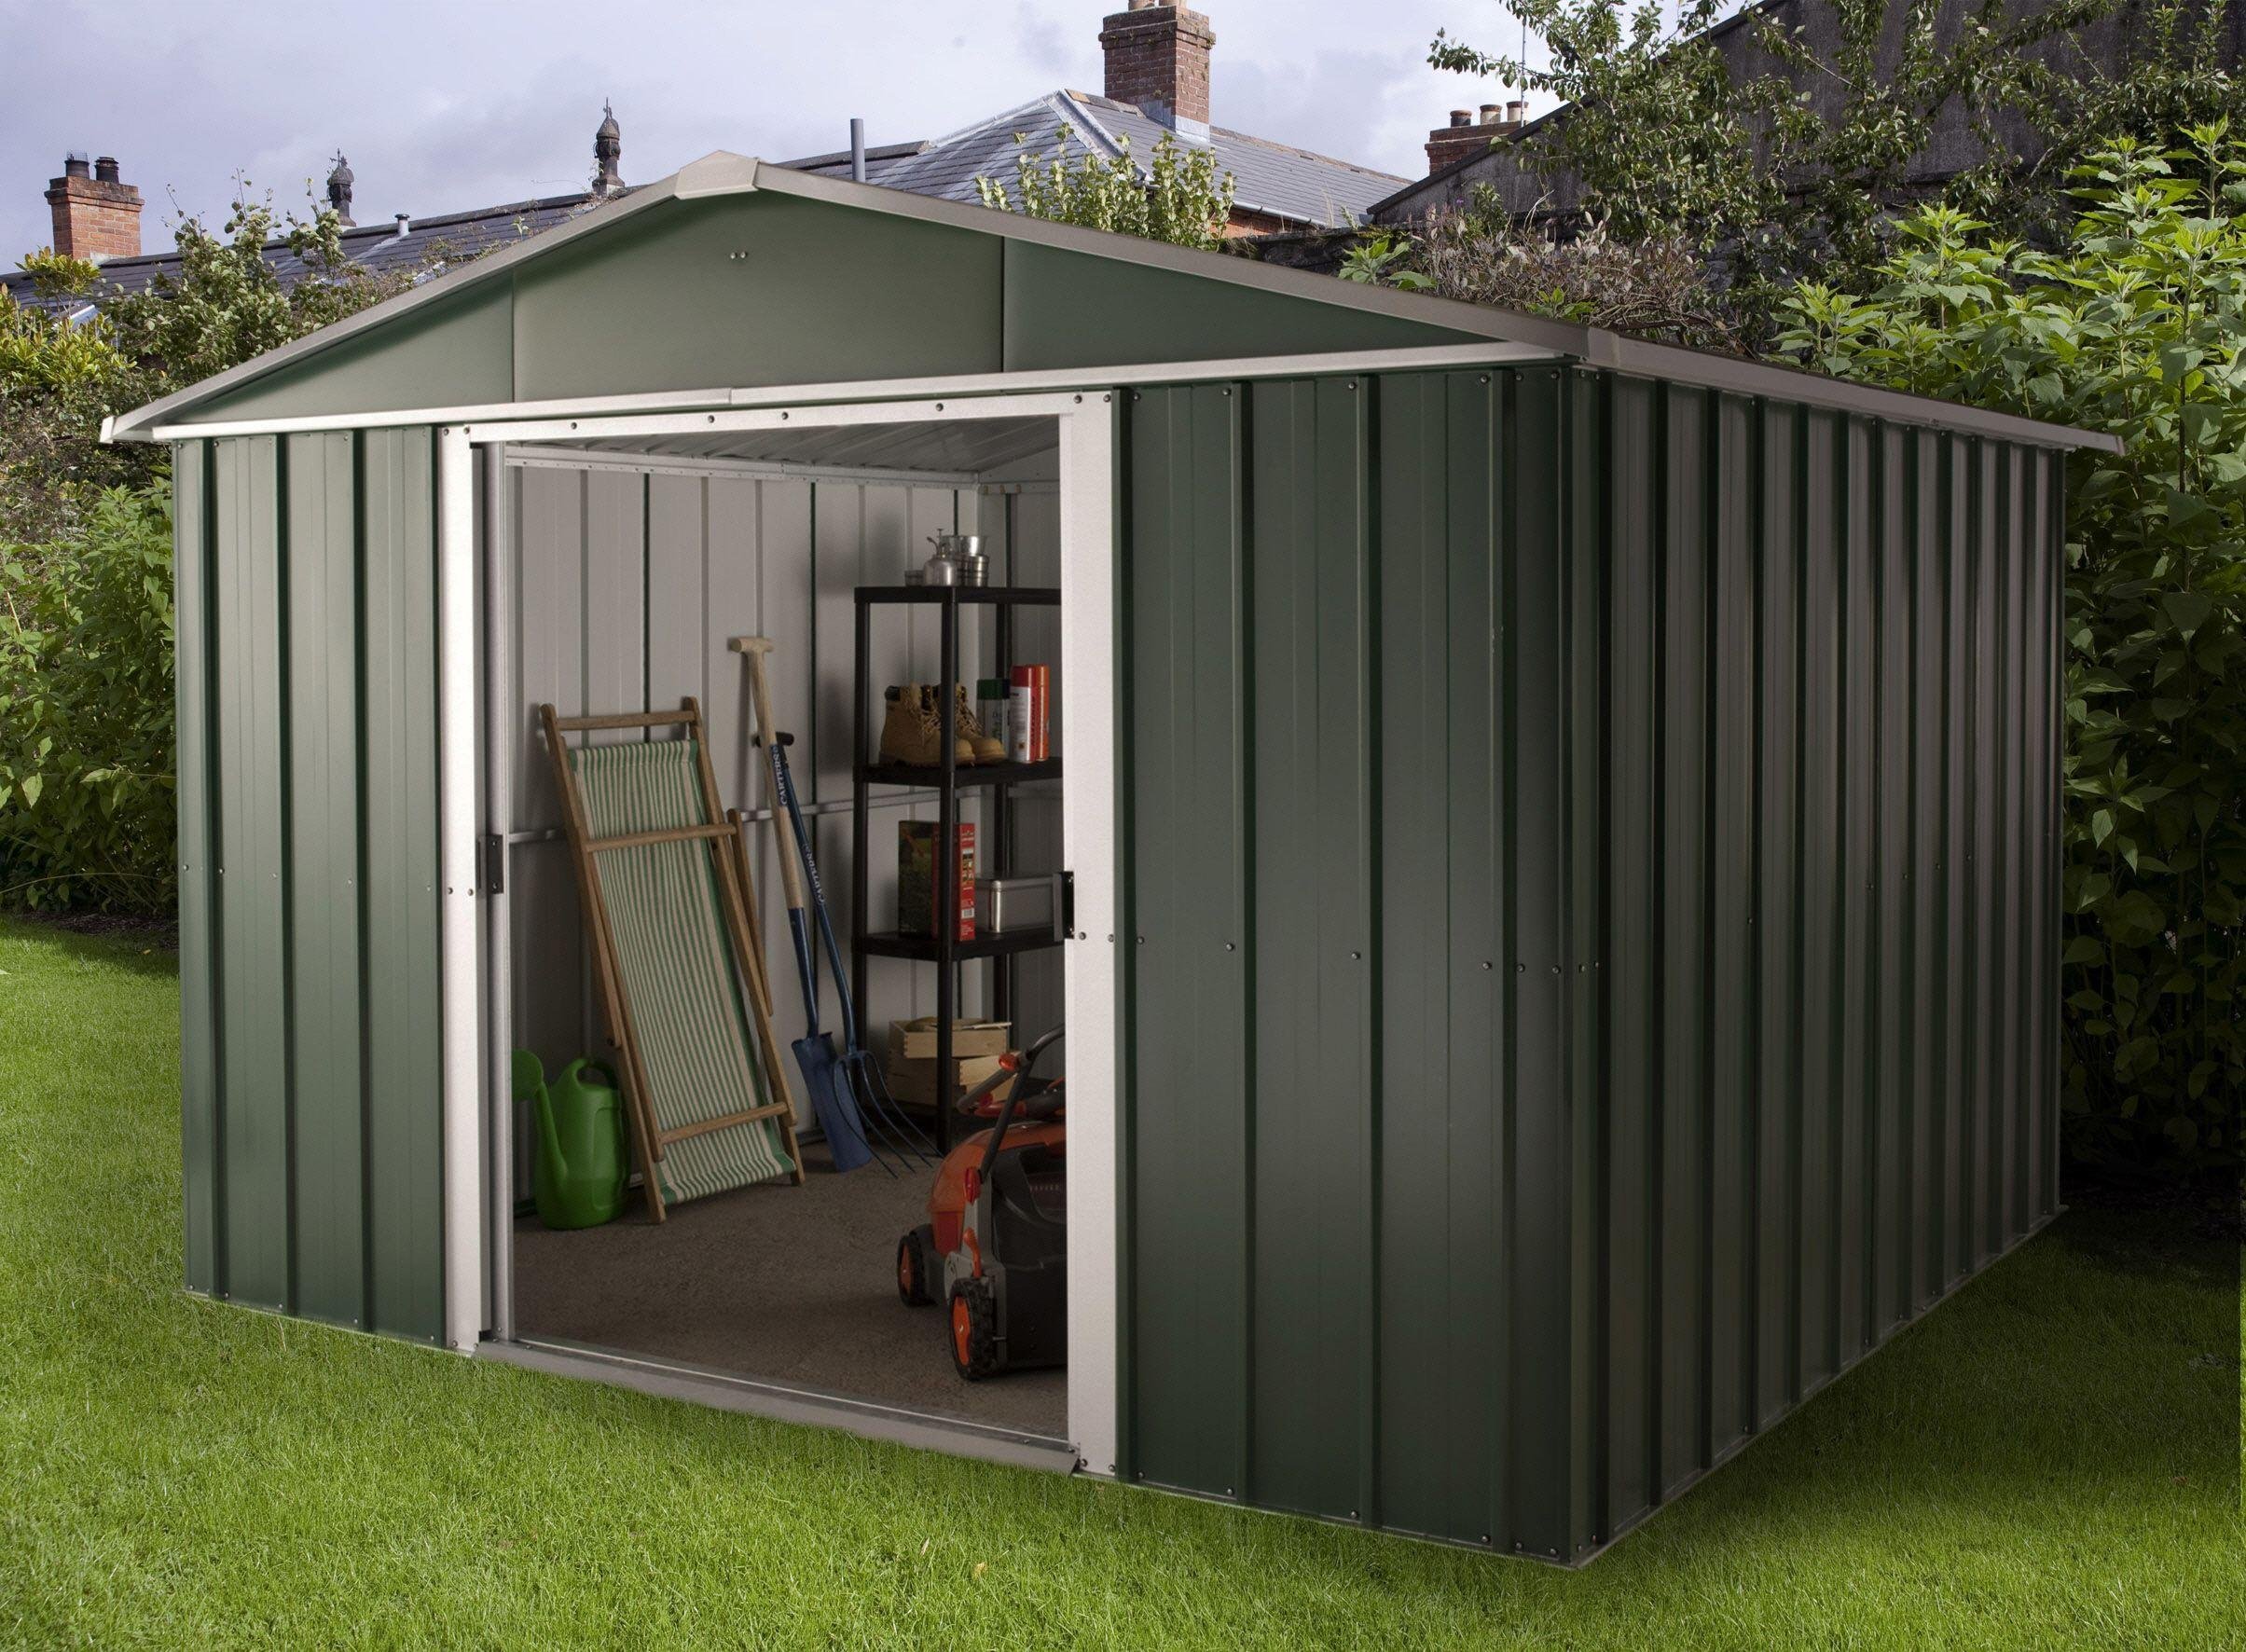 Yardmaster Deluxe Metal Shed with Support Frame - 10 x 10ft